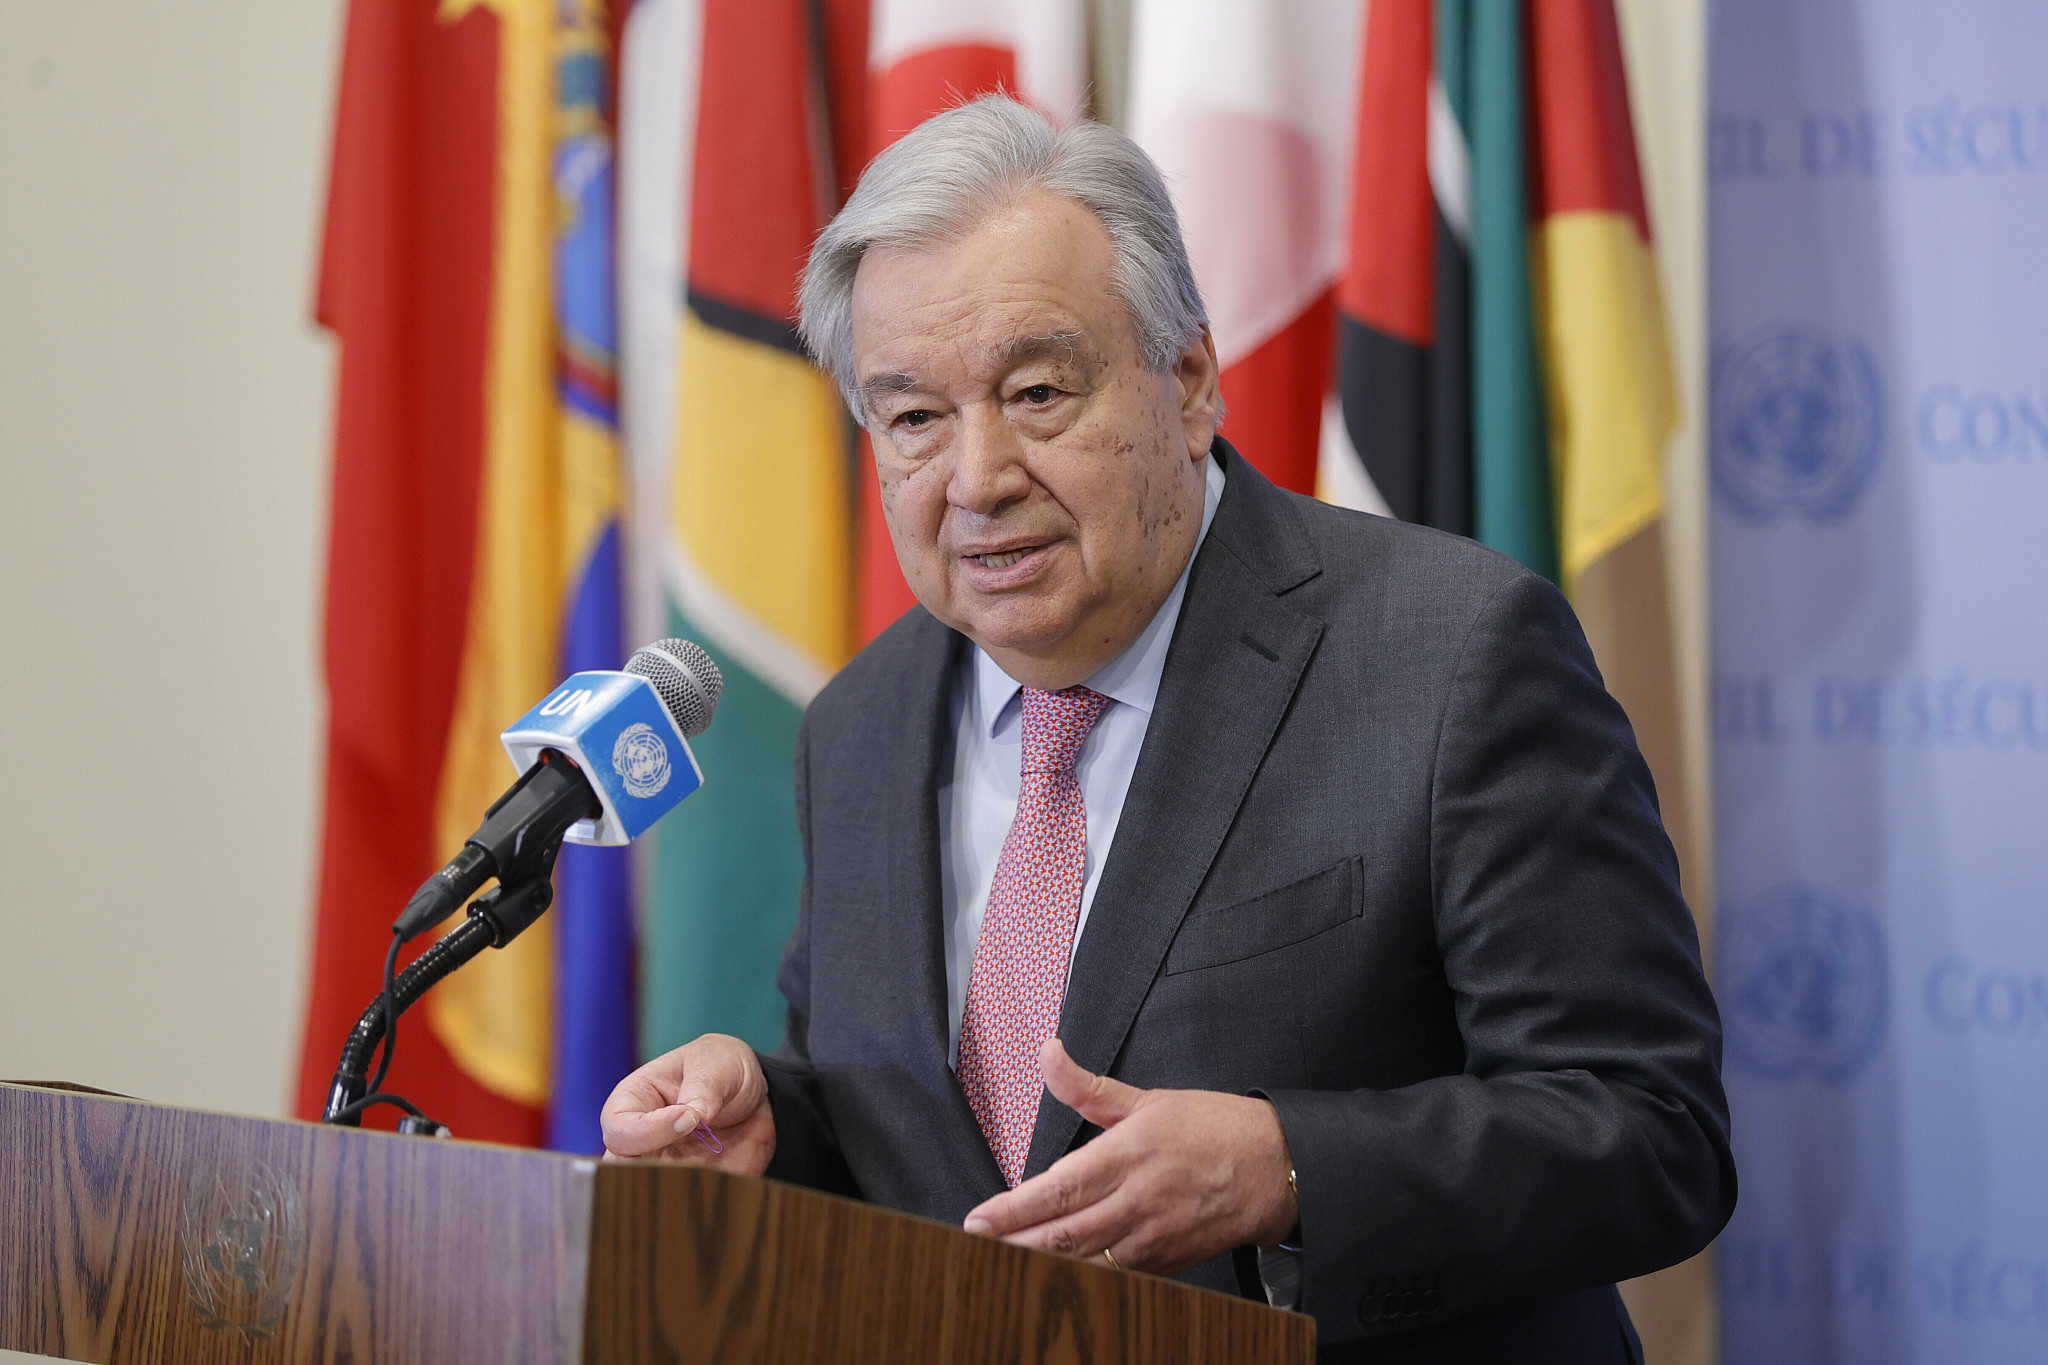 The United Nations Secretary-General Antonio Guterres briefs the press on the escalation between Israel and Hezbollah along the Blue Line, a demarcation line set by the UN in 2000 between Lebanon and Israel, at the United Nations Headquarters in New York City, June 21, 2024. /CFP